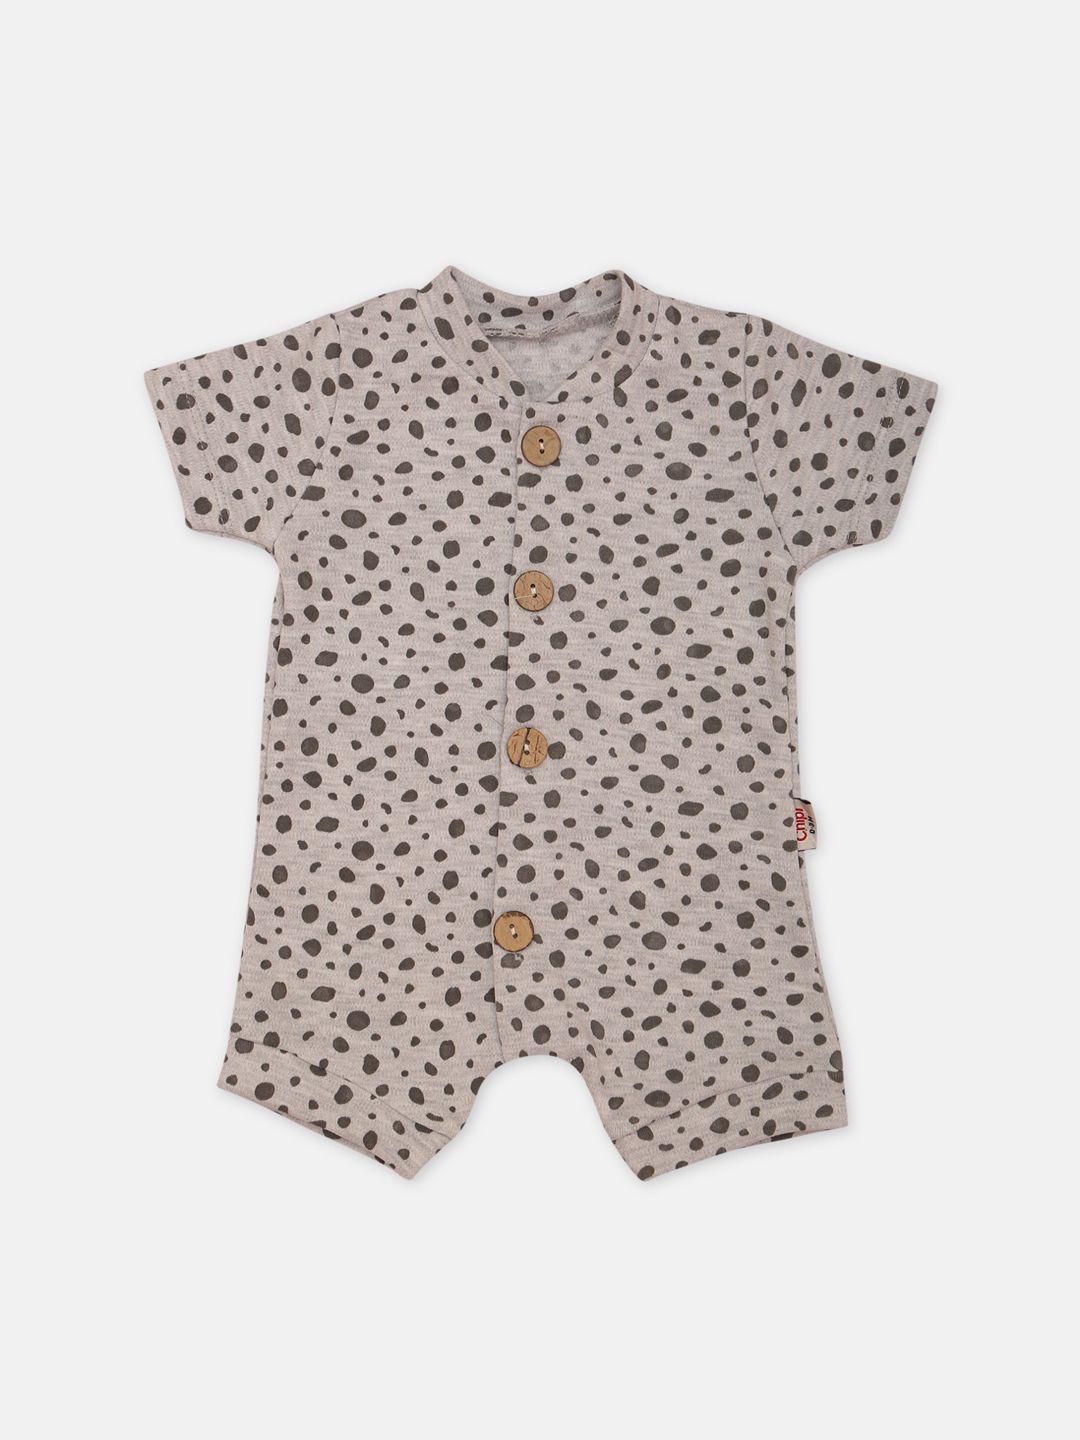 zyra-kids-infant-boys-grey-&-green-printed-rompers